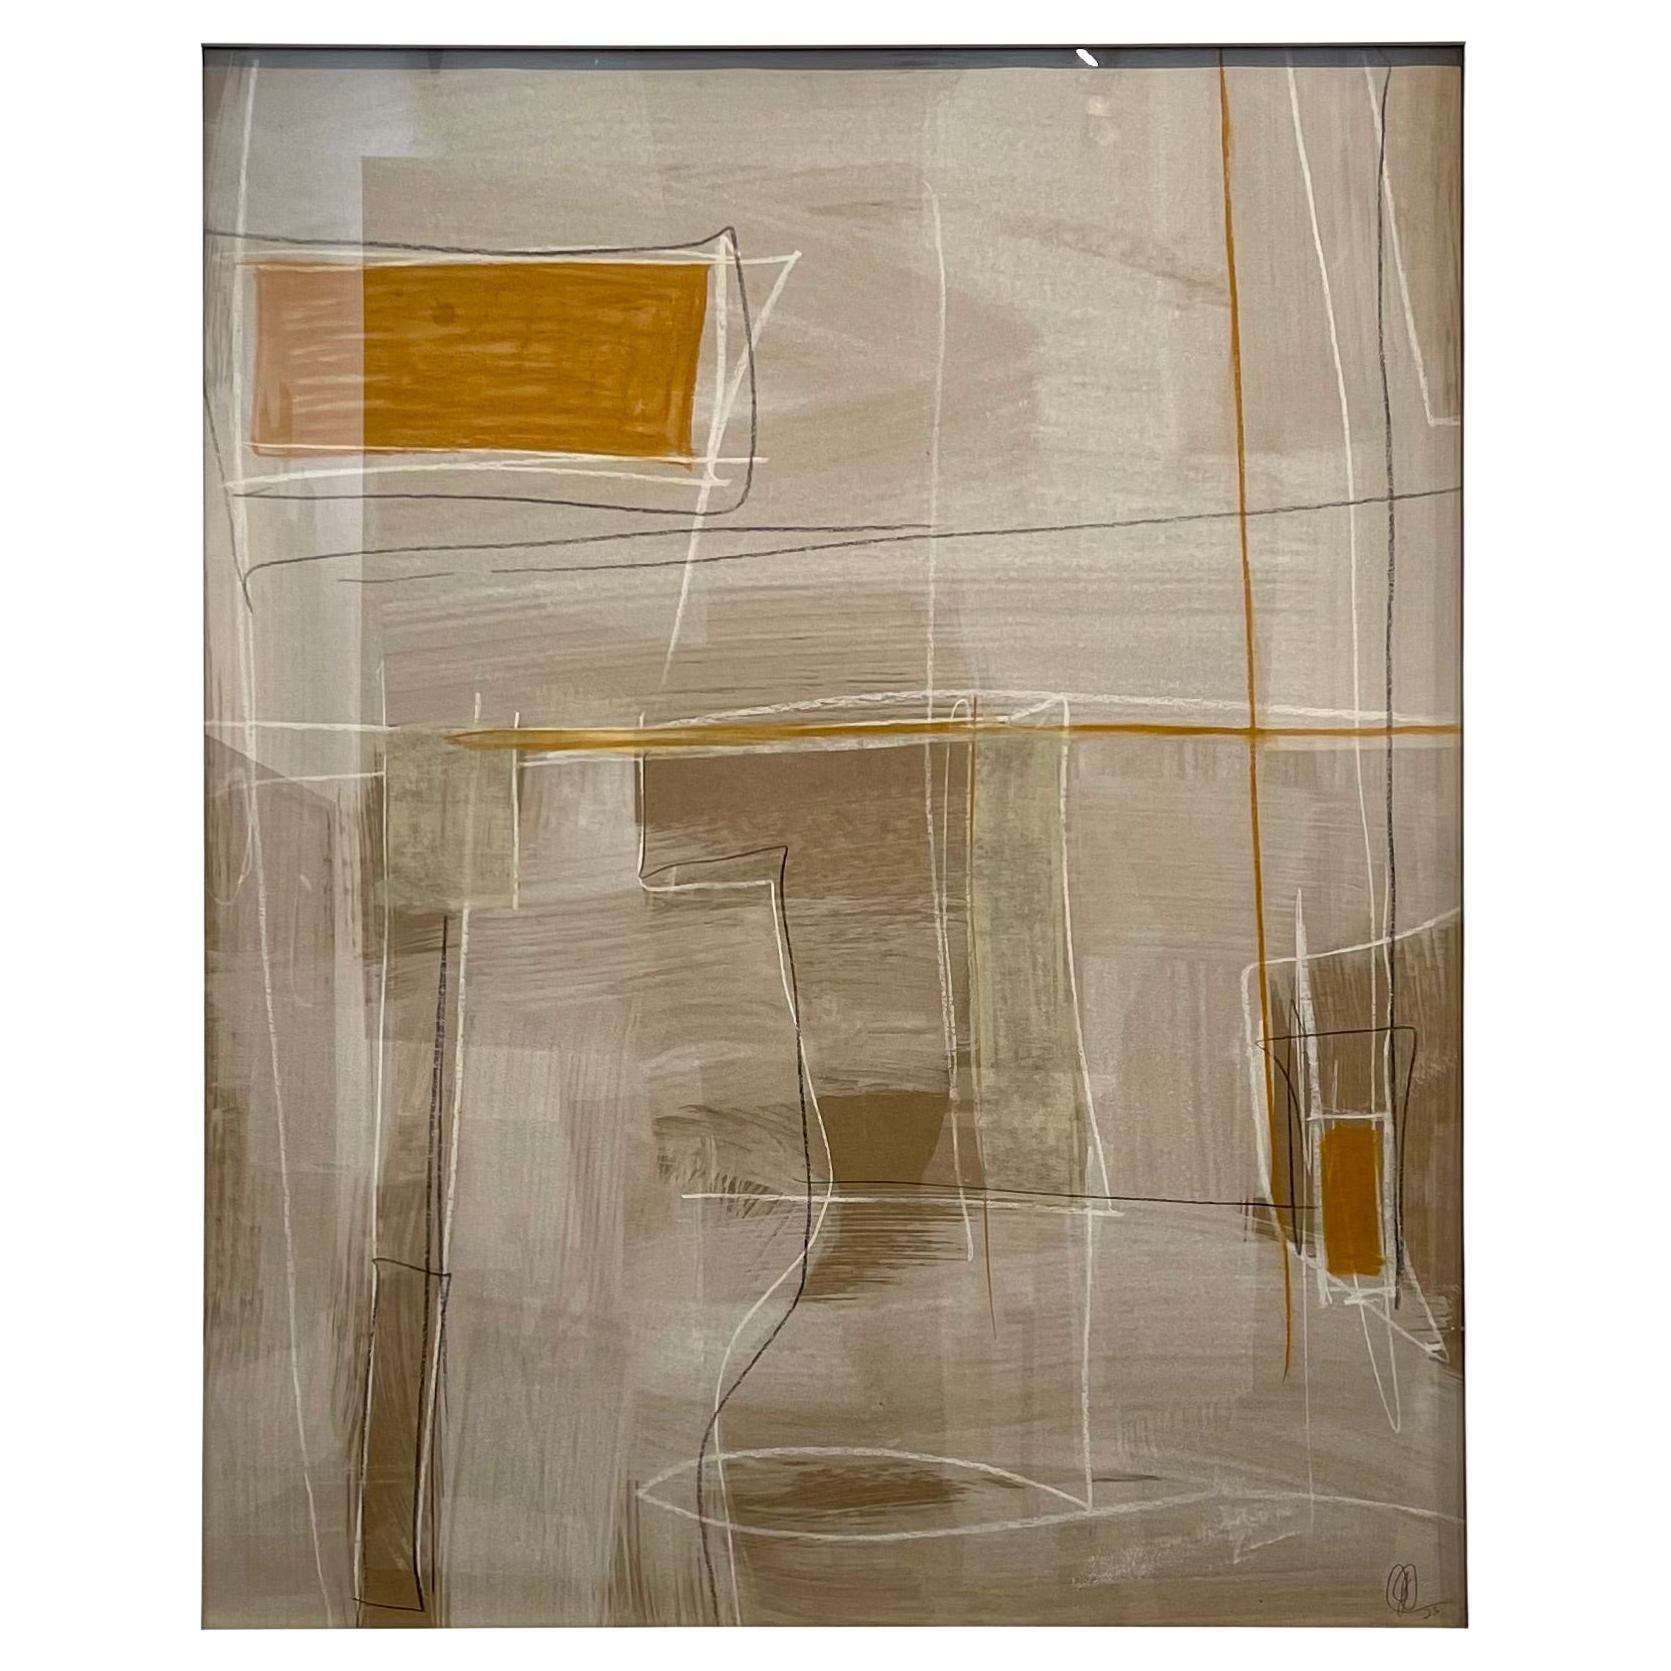 Untitled # 115 by Murray Duncan, mix media on paper, abstract, framed For Sale